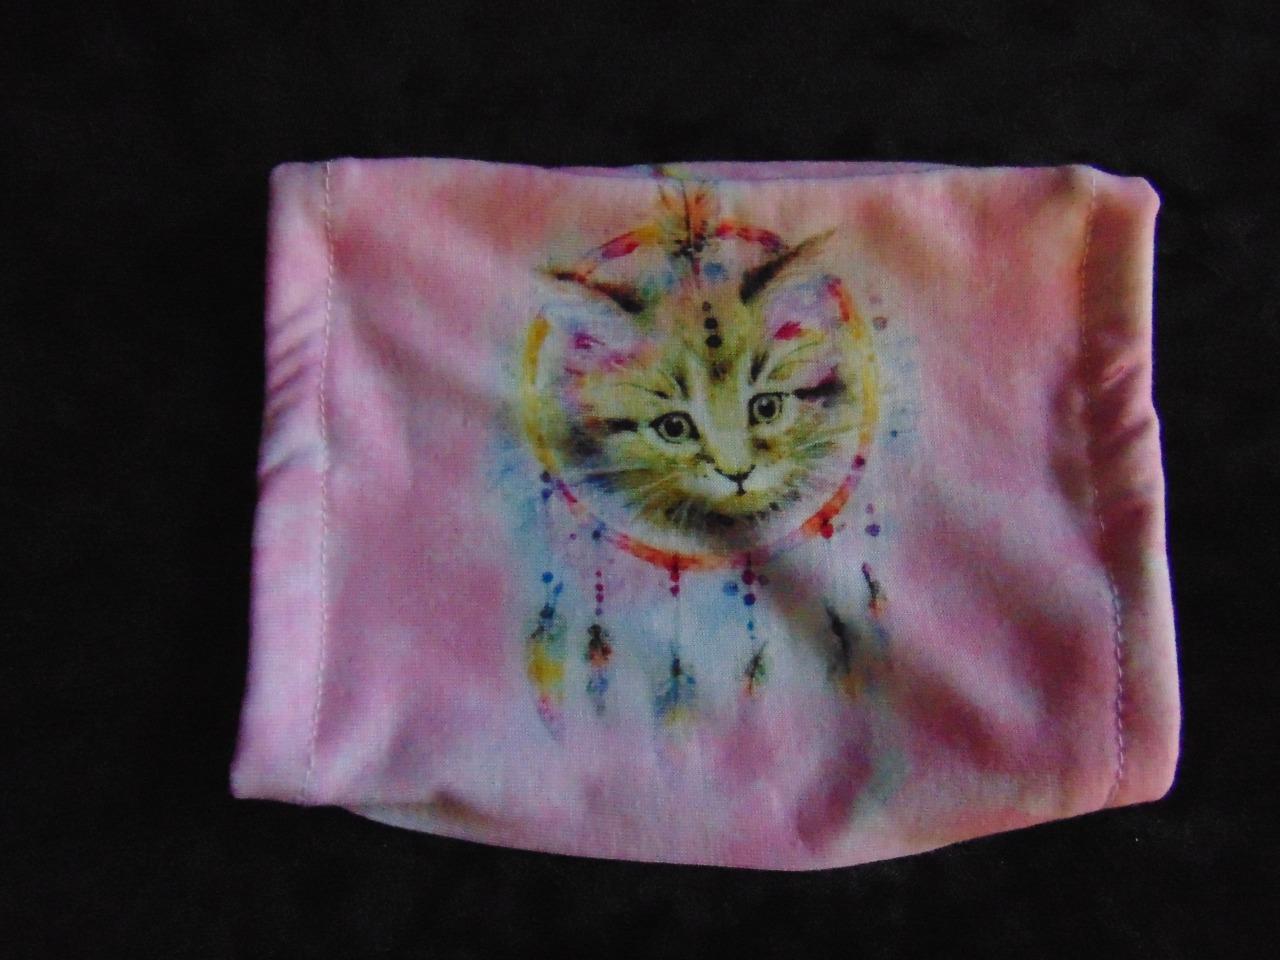 DREAM CATCHER KITTY PRINTED SOFT COTTON KNIT FACE MASK FROM PAWS & PALS - Afbeelding 1 van 1